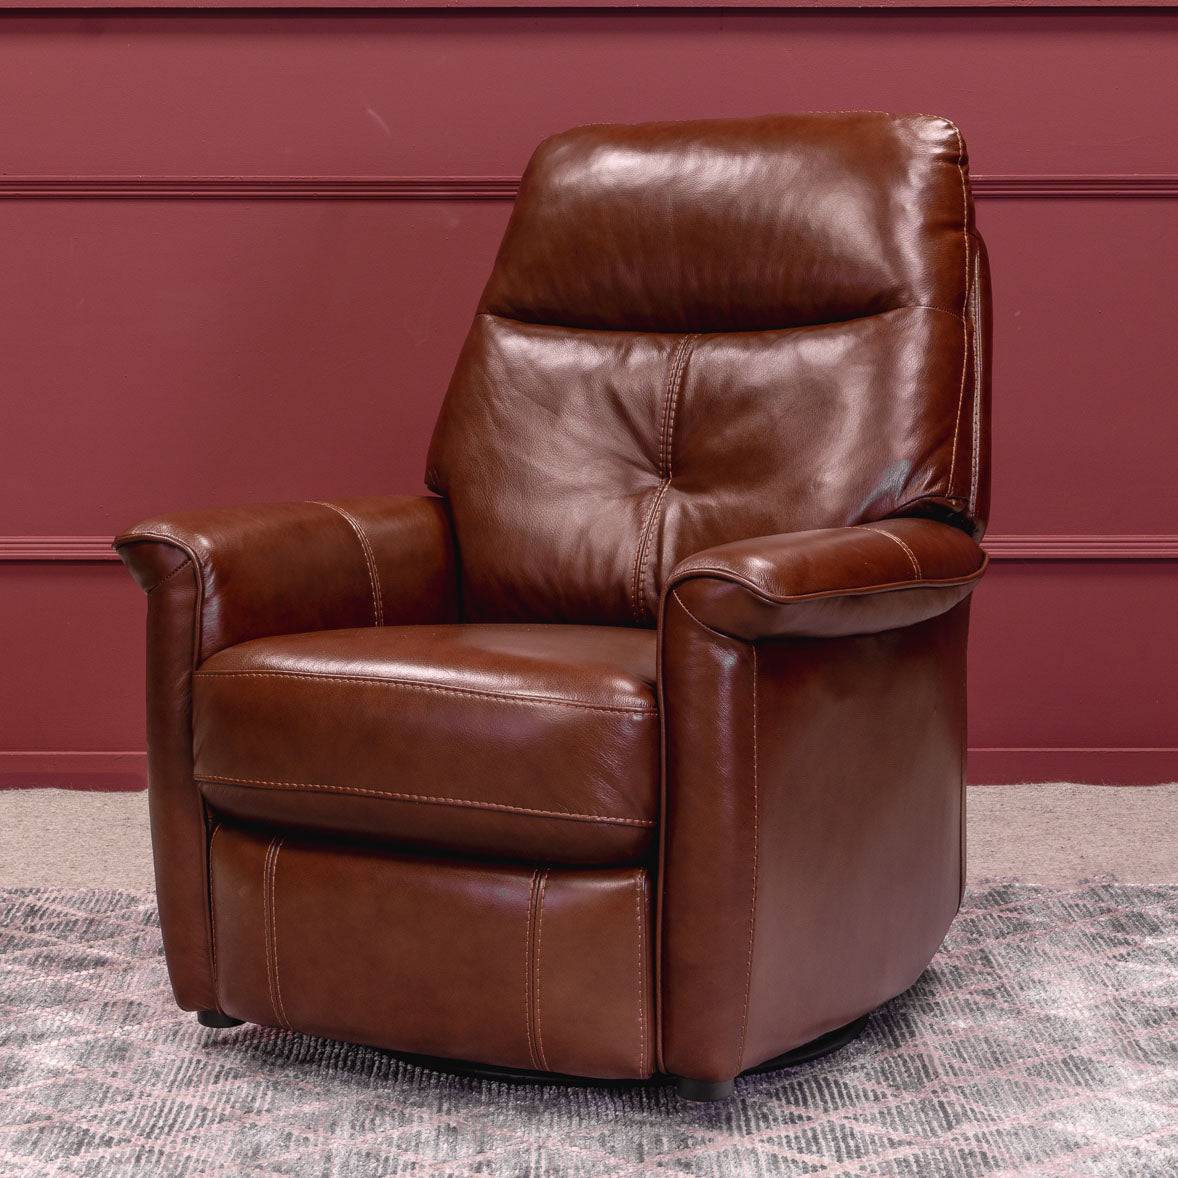 Draco Powered Rocker Recliner Chair Standard Height - Leather